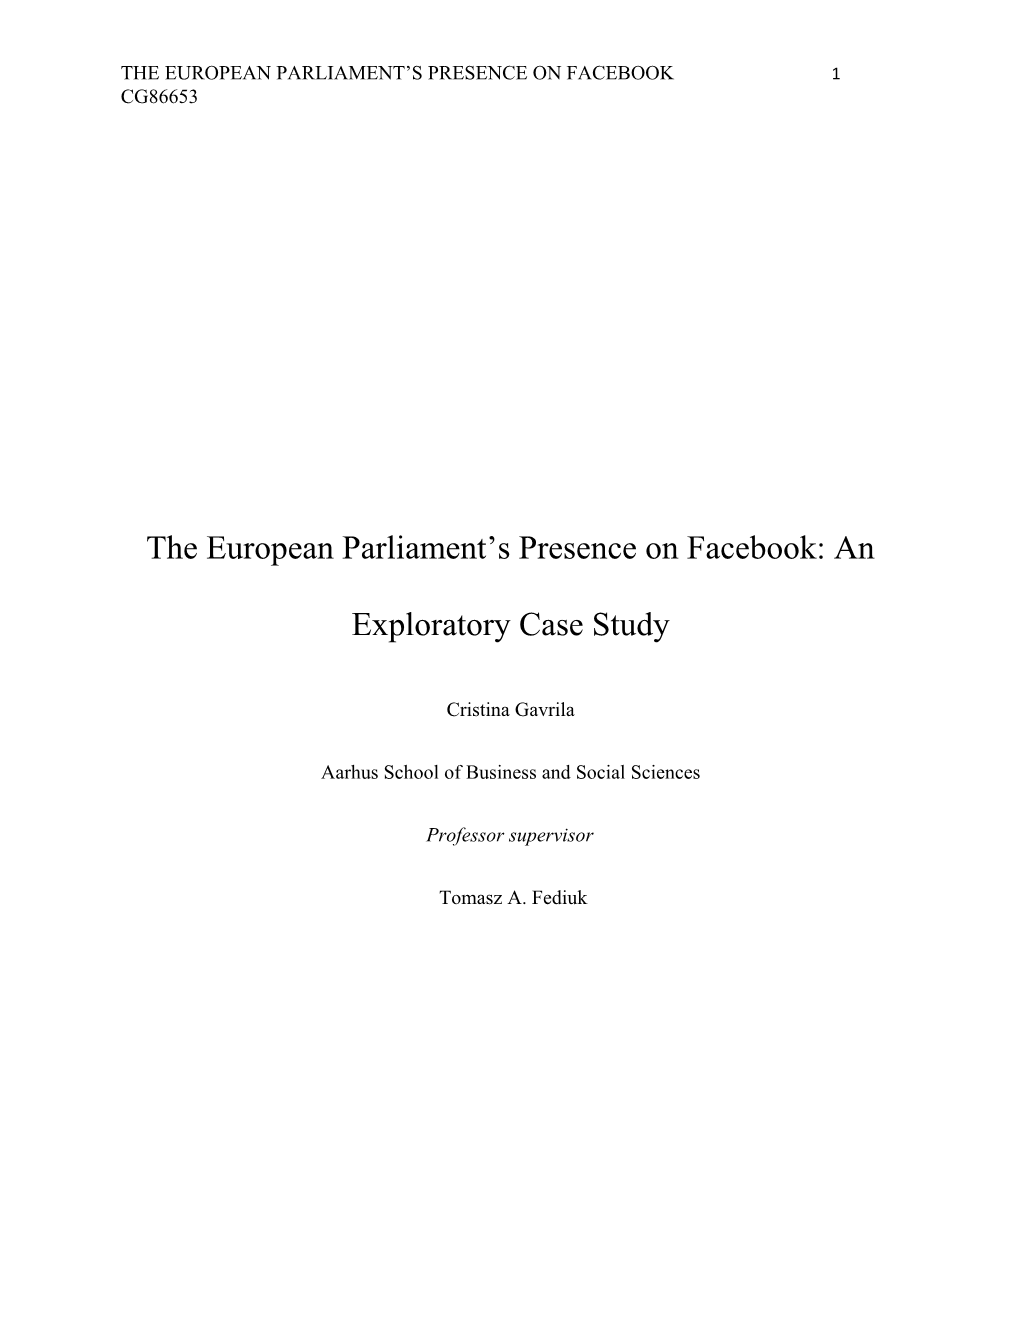 A Case Study of the European Parliament on Facebook